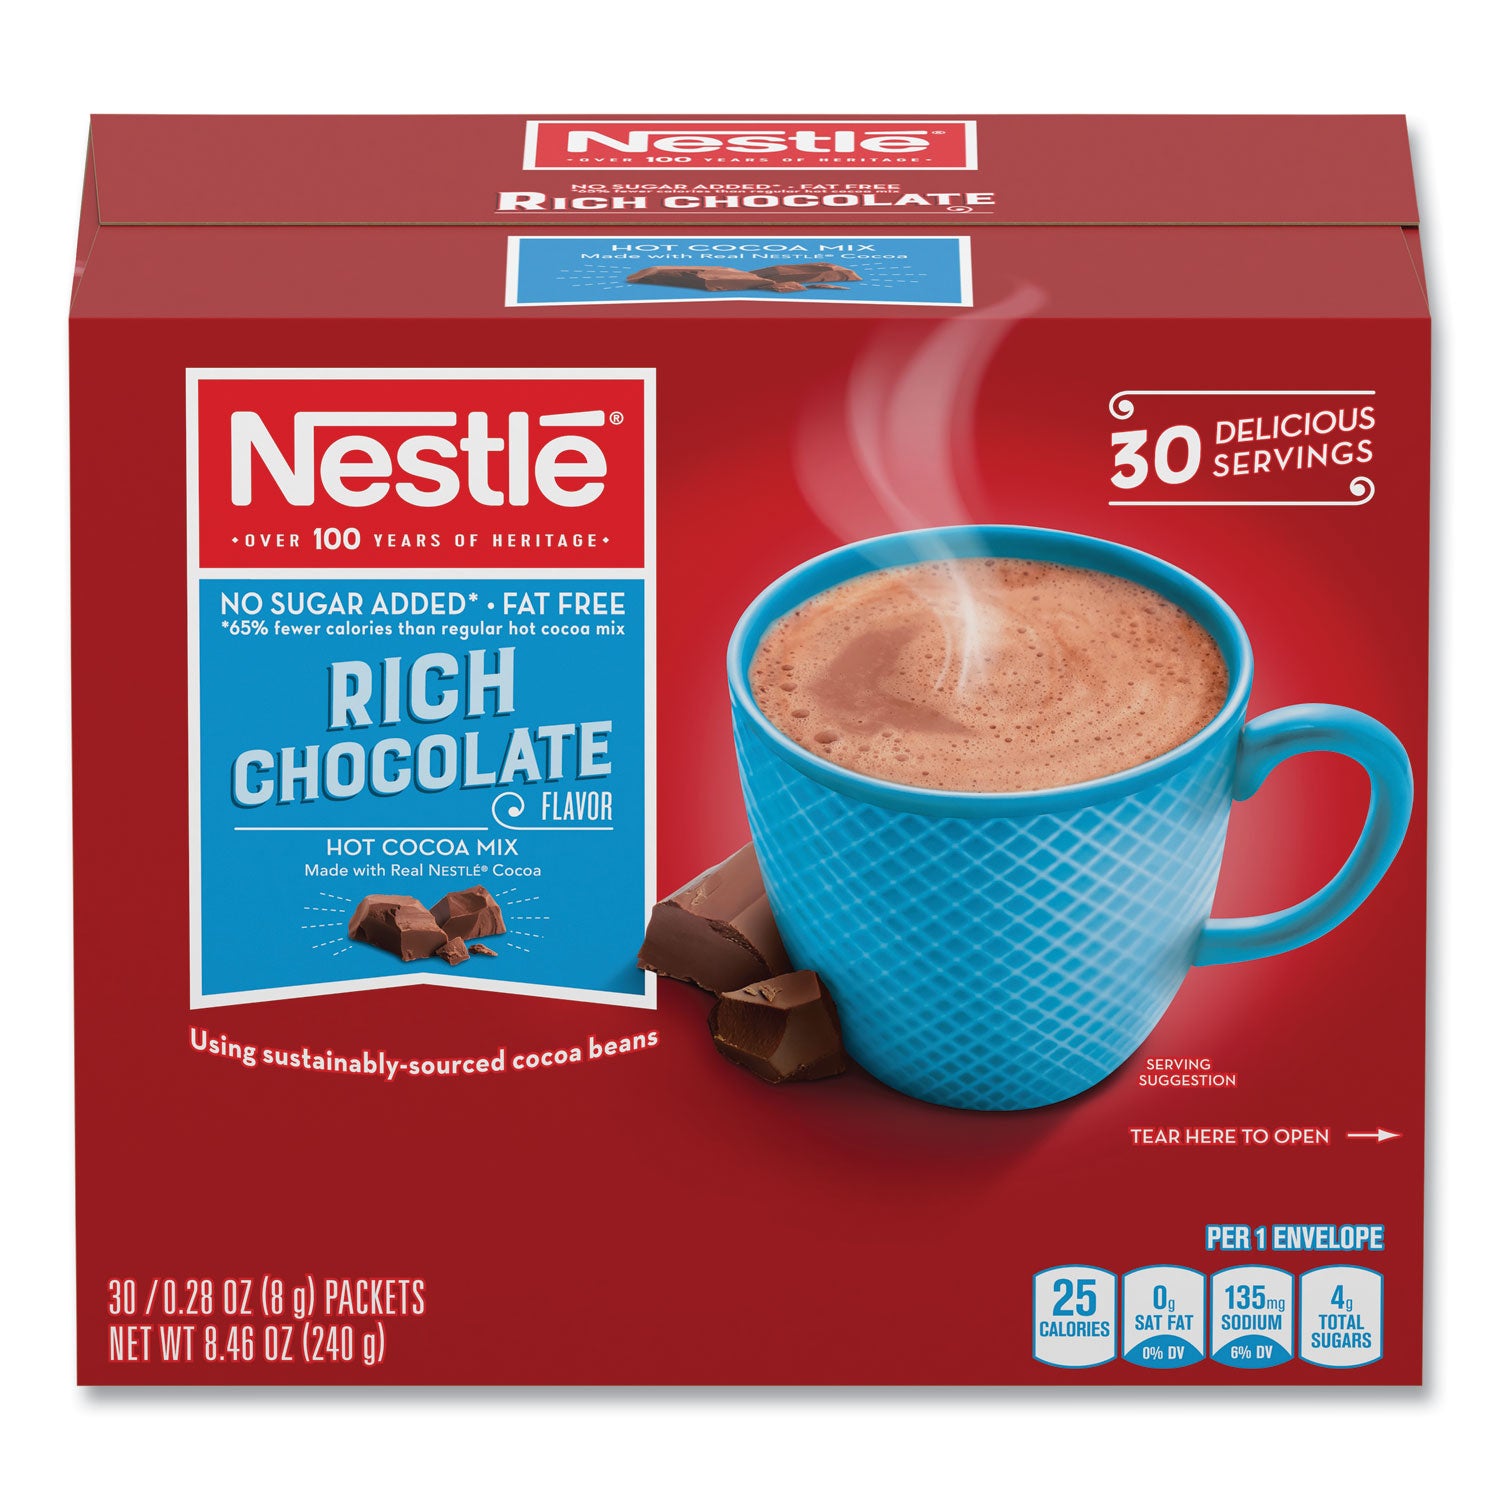 hot-cocoa-mix-rich-chocolate-028-oz-packet-30-packets-box-6-boxes-carton_nes61411ct - 2